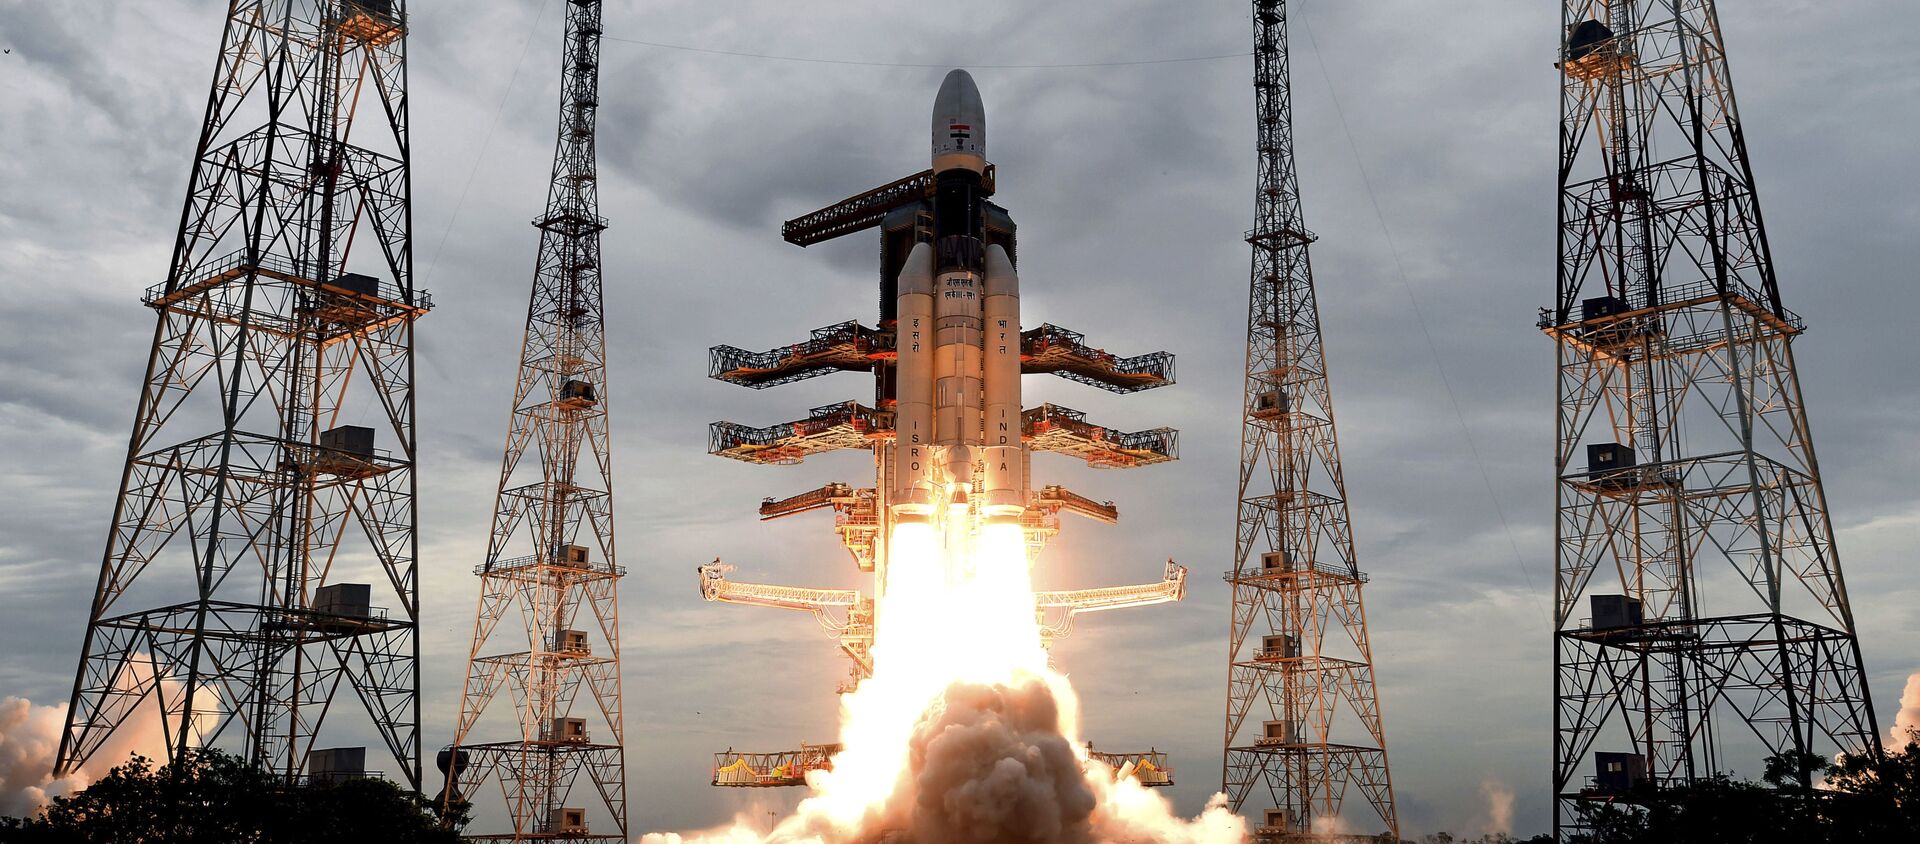 This photo released by the Indian Space Research Organization (ISRO) shows its Geosynchronous Satellite launch Vehicle (GSLV) MkIII carrying Chandrayaan-2 lift off from Satish Dhawan Space center in Sriharikota, India, Monday, July 22, 2019 - Sputnik International, 1920, 16.05.2020